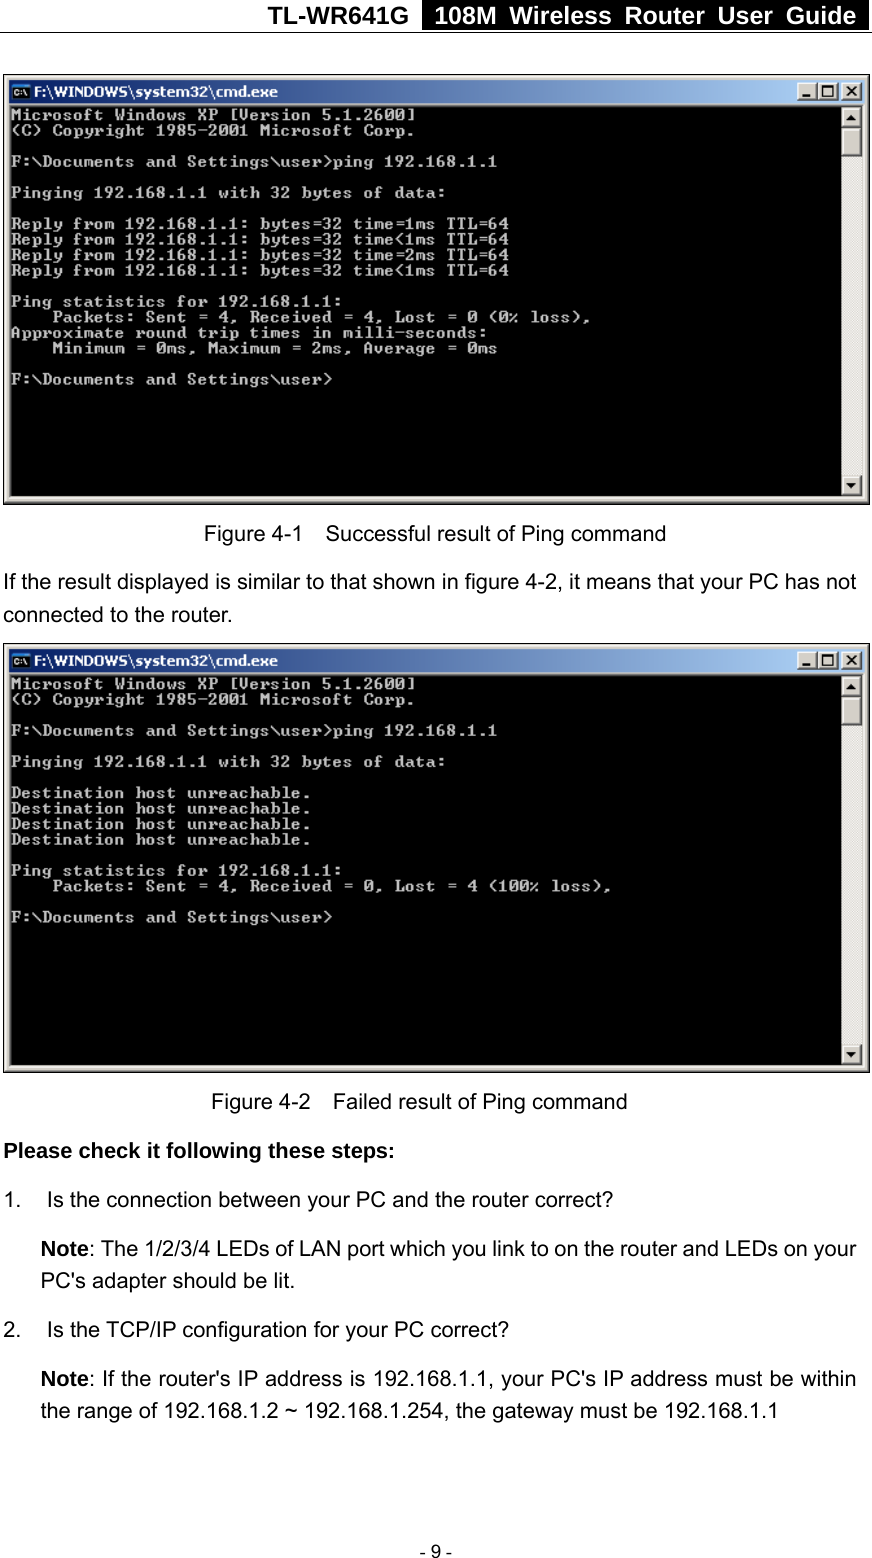 TL-WR641G   108M Wireless Router User Guide    Figure 4-1    Successful result of Ping command If the result displayed is similar to that shown in figure 4-2, it means that your PC has not connected to the router.      Figure 4-2    Failed result of Ping command Please check it following these steps: 1.  Is the connection between your PC and the router correct? Note: The 1/2/3/4 LEDs of LAN port which you link to on the router and LEDs on your PC&apos;s adapter should be lit. 2. Is the TCP/IP configuration for your PC correct? Note: If the router&apos;s IP address is 192.168.1.1, your PC&apos;s IP address must be within the range of 192.168.1.2 ~ 192.168.1.254, the gateway must be 192.168.1.1  - 9 - 